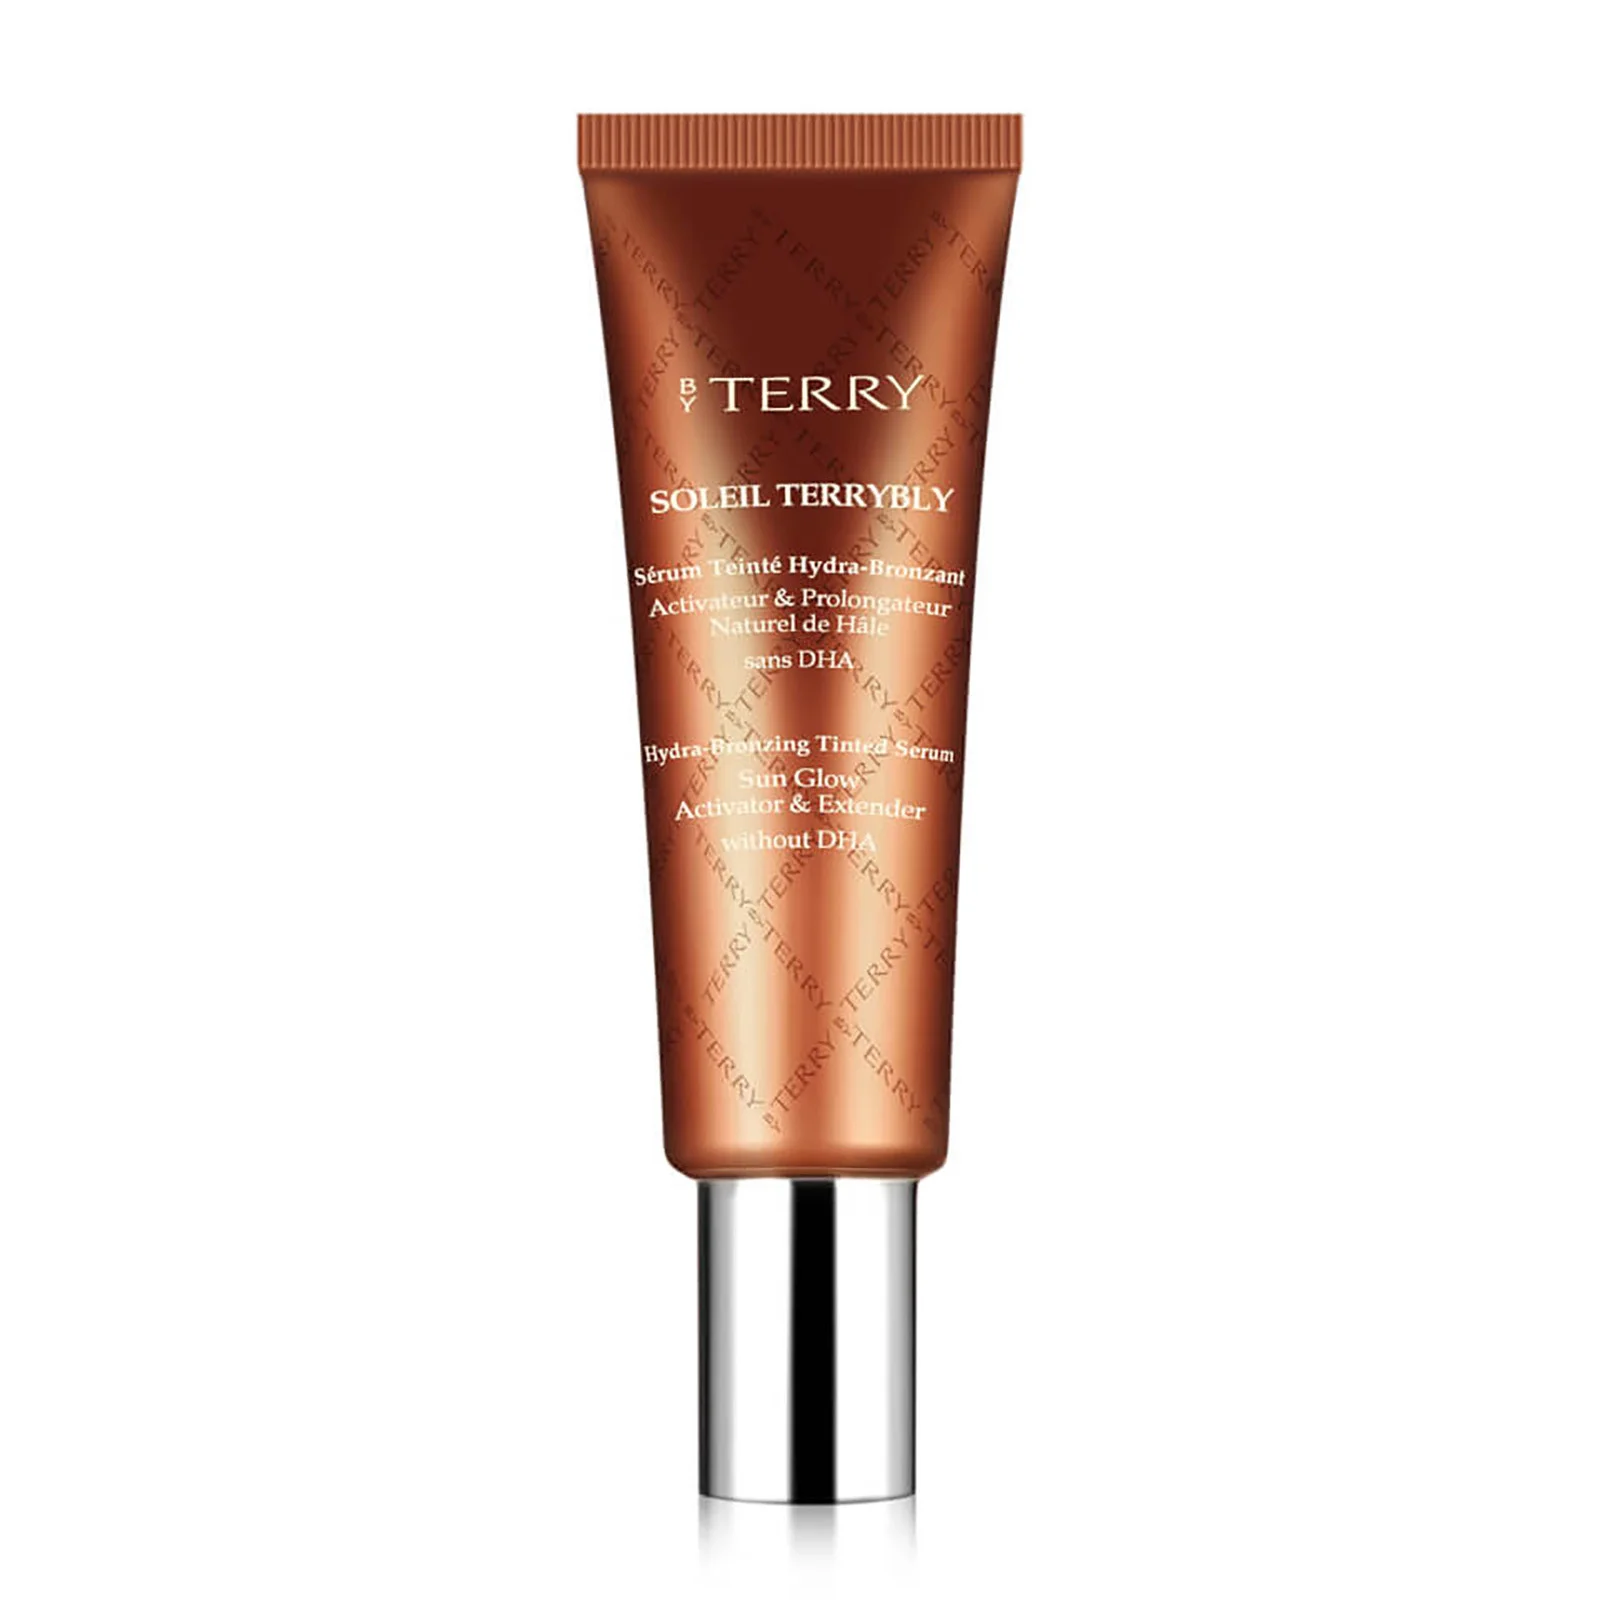 By Terry Soleil Terrybly Serum 35ml (Various Shades) Image 1